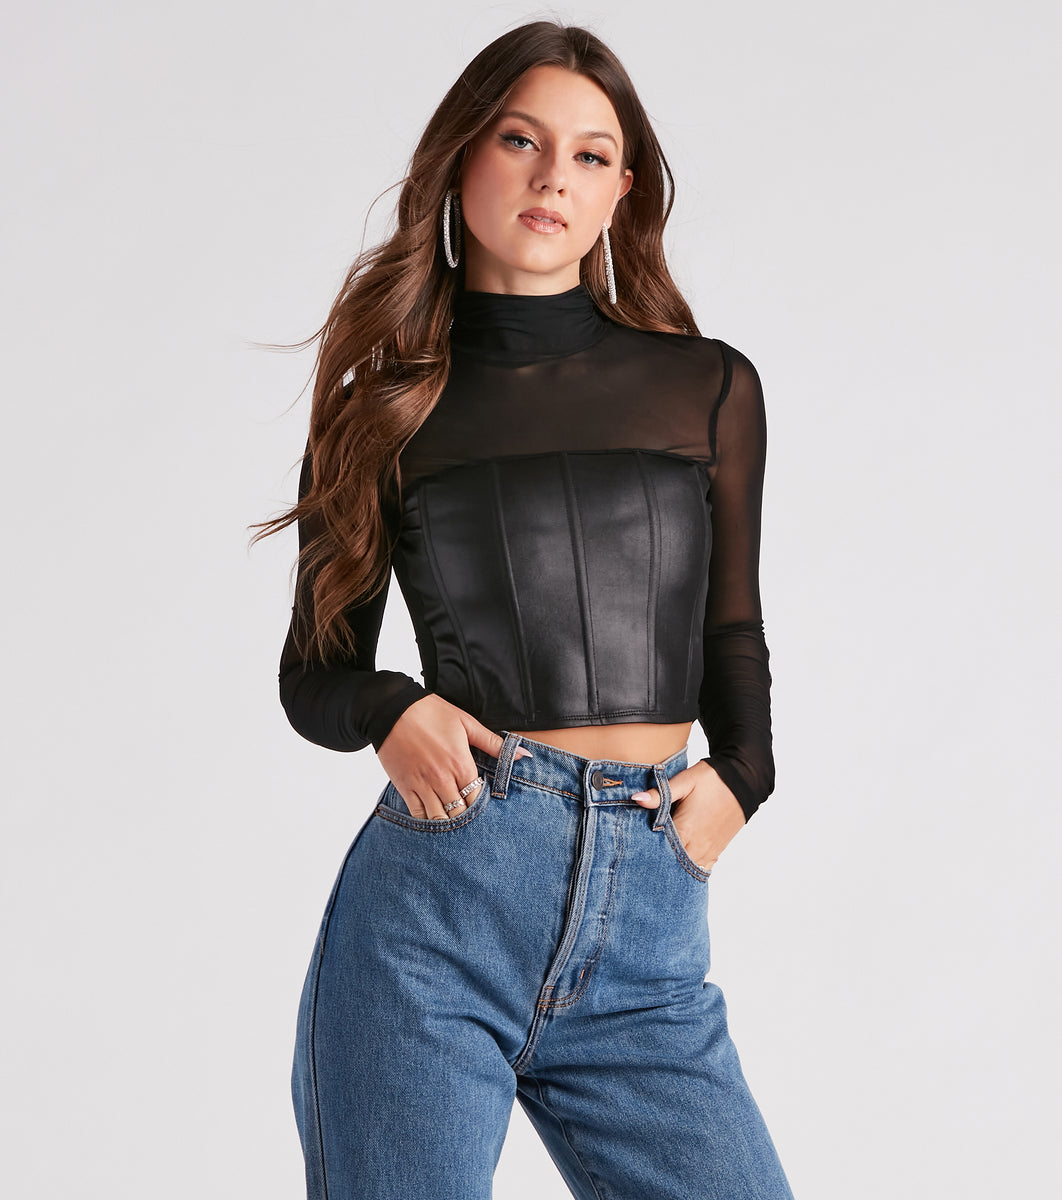 Bebe Women's Long Sleeve Mesh Top with Faux Leather Bustier - Macy's